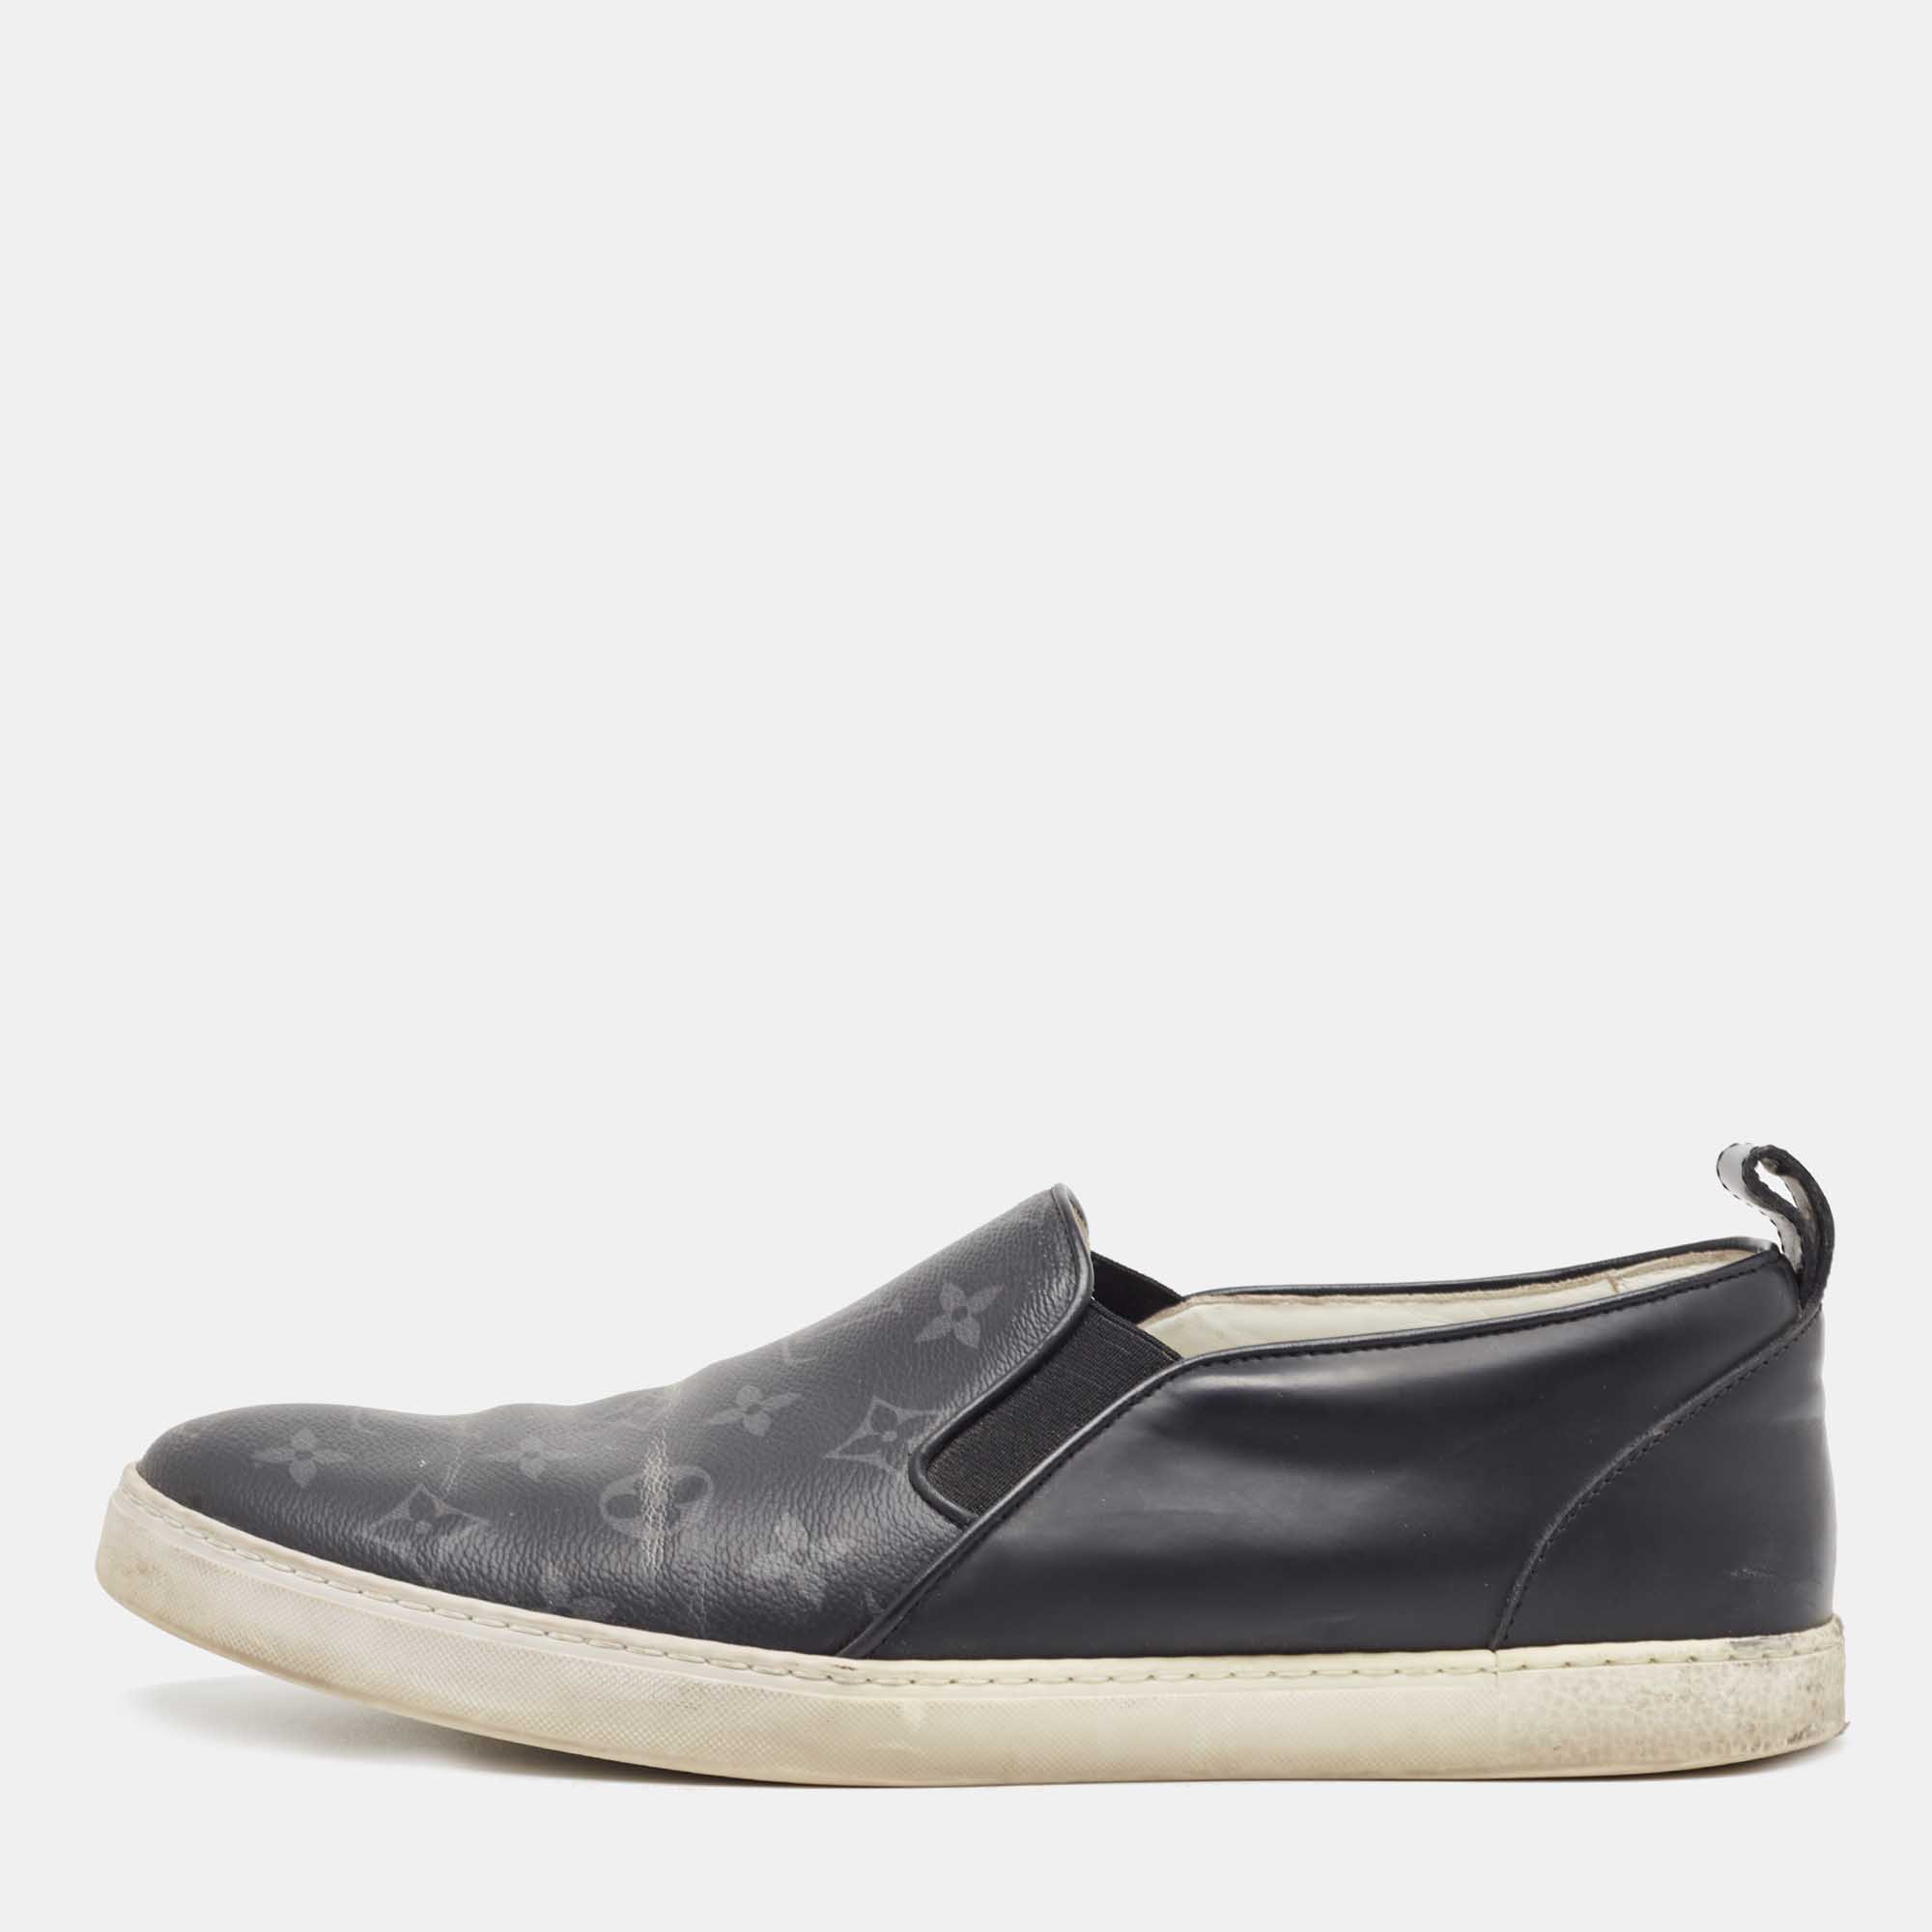 Men's Louis Vuitton Slip-on shoes from $600